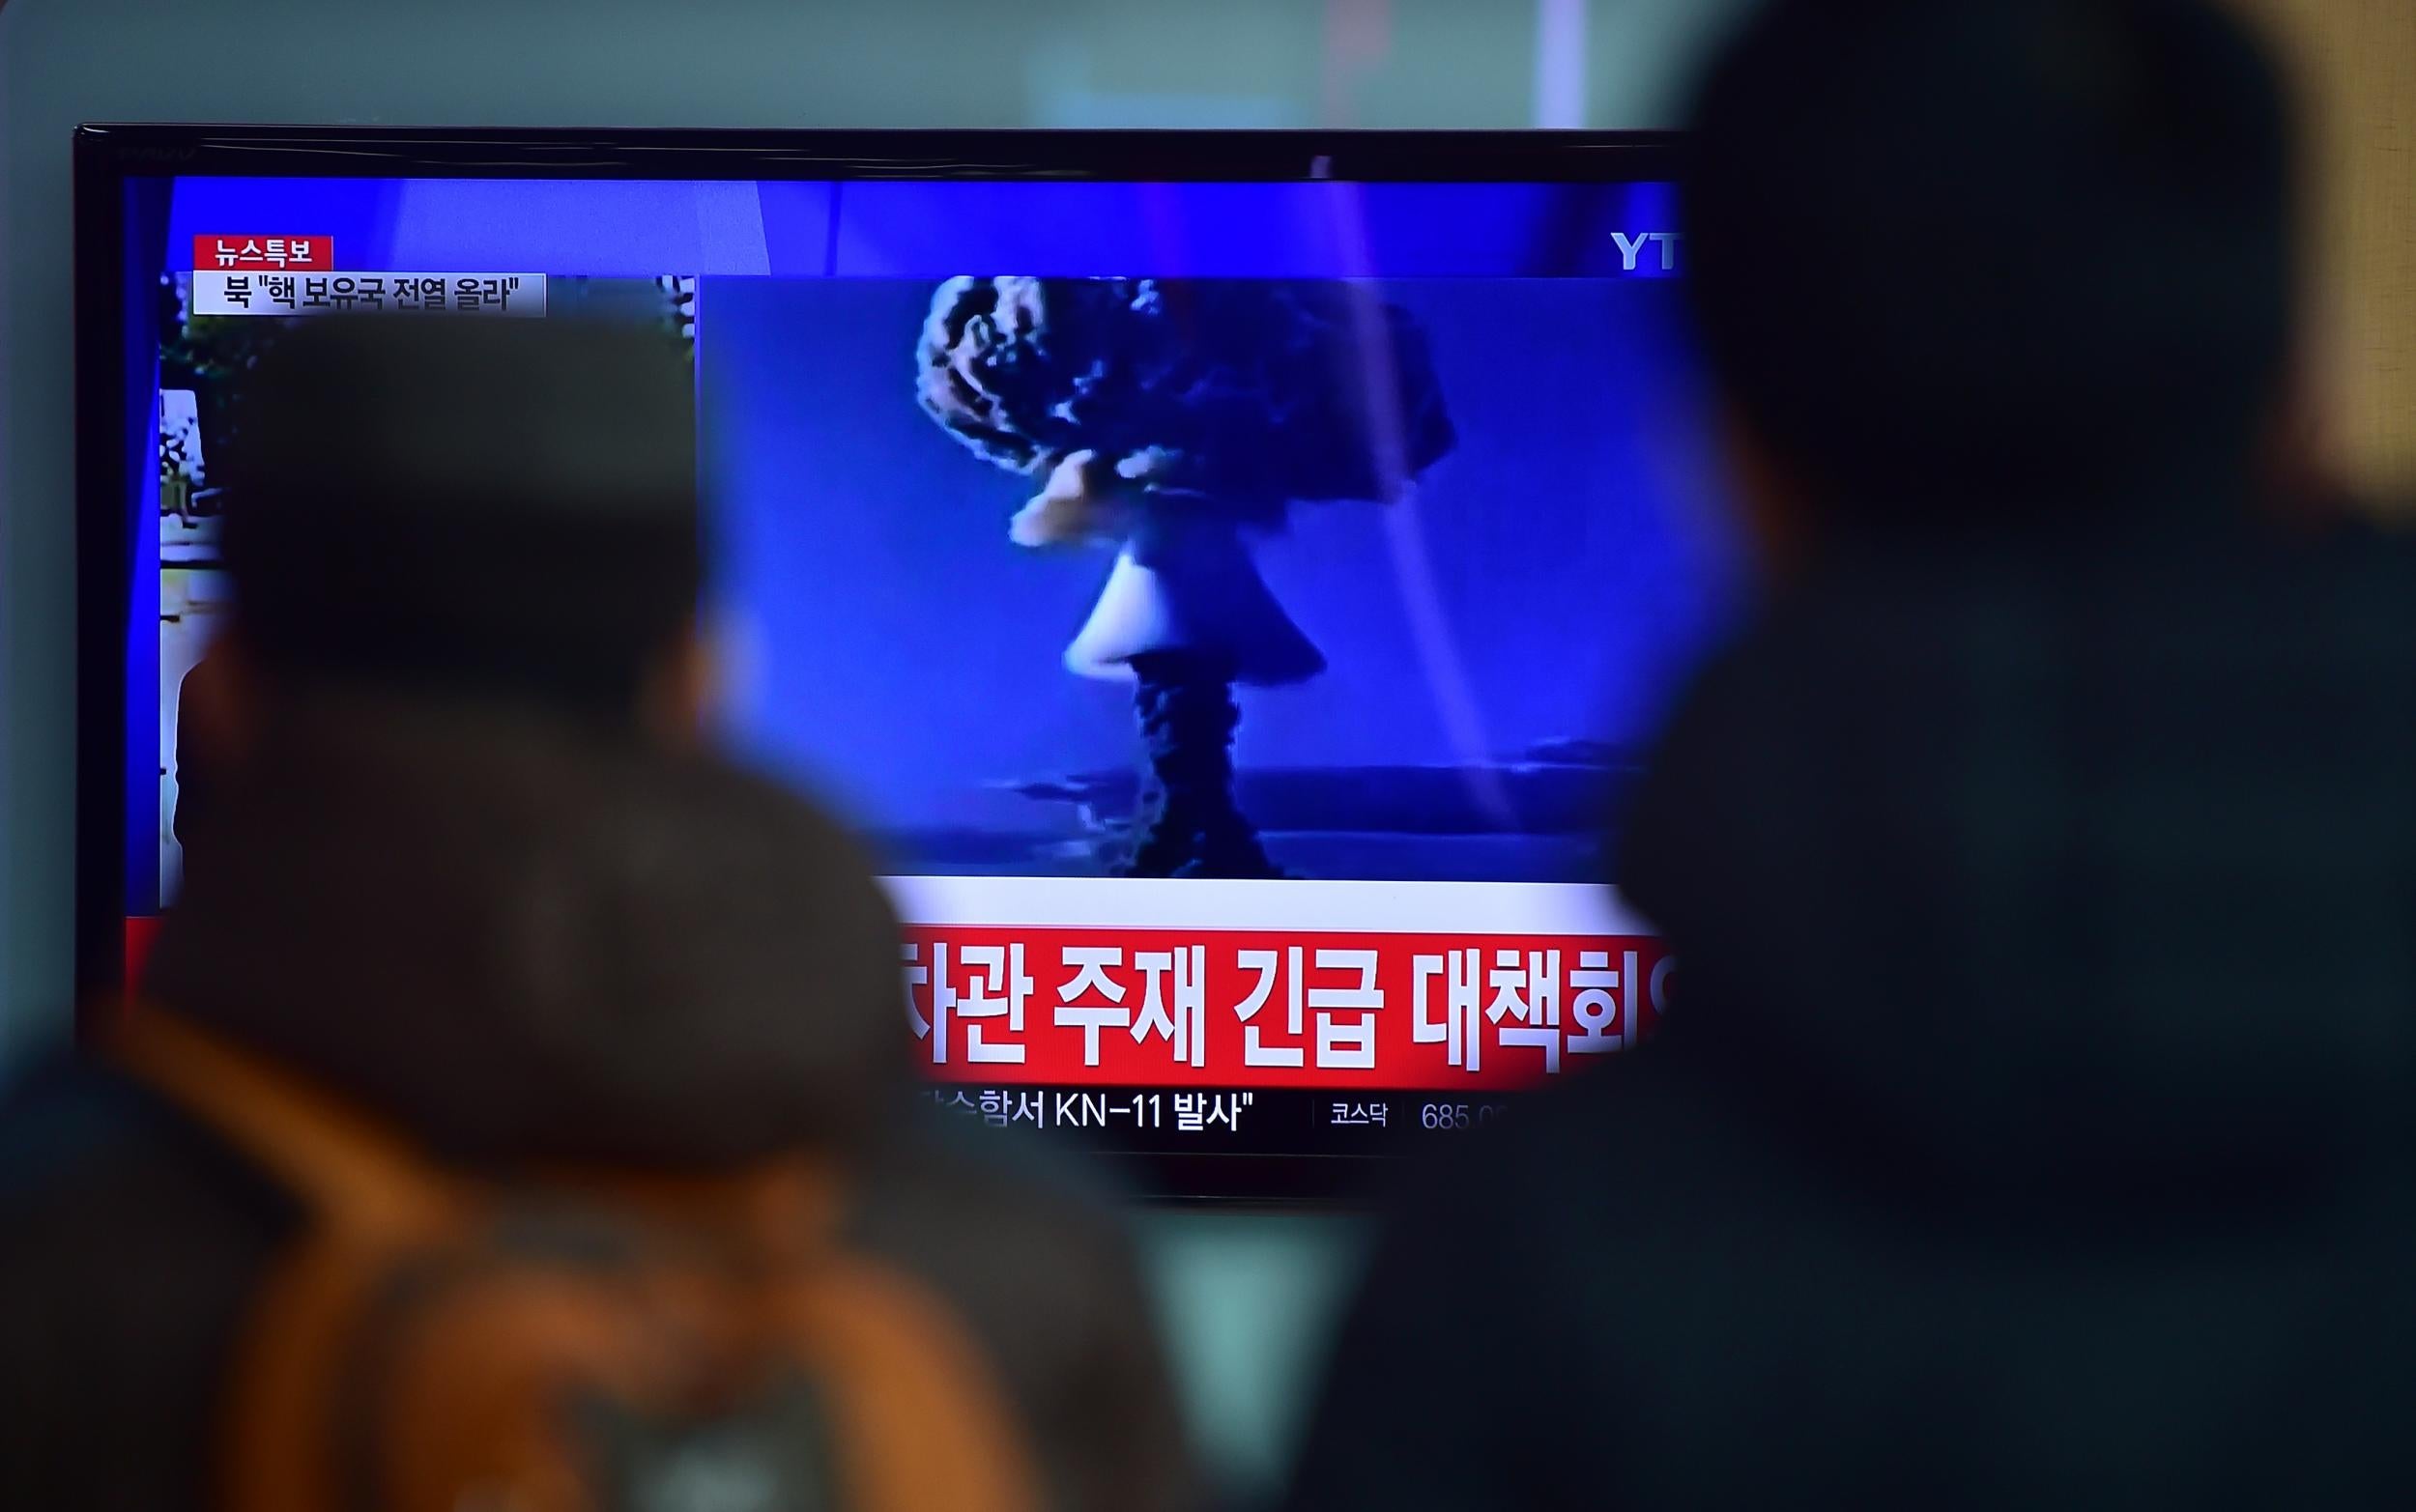 South Koreans watch a news report on North Korea's bomb test in a Seoul train station